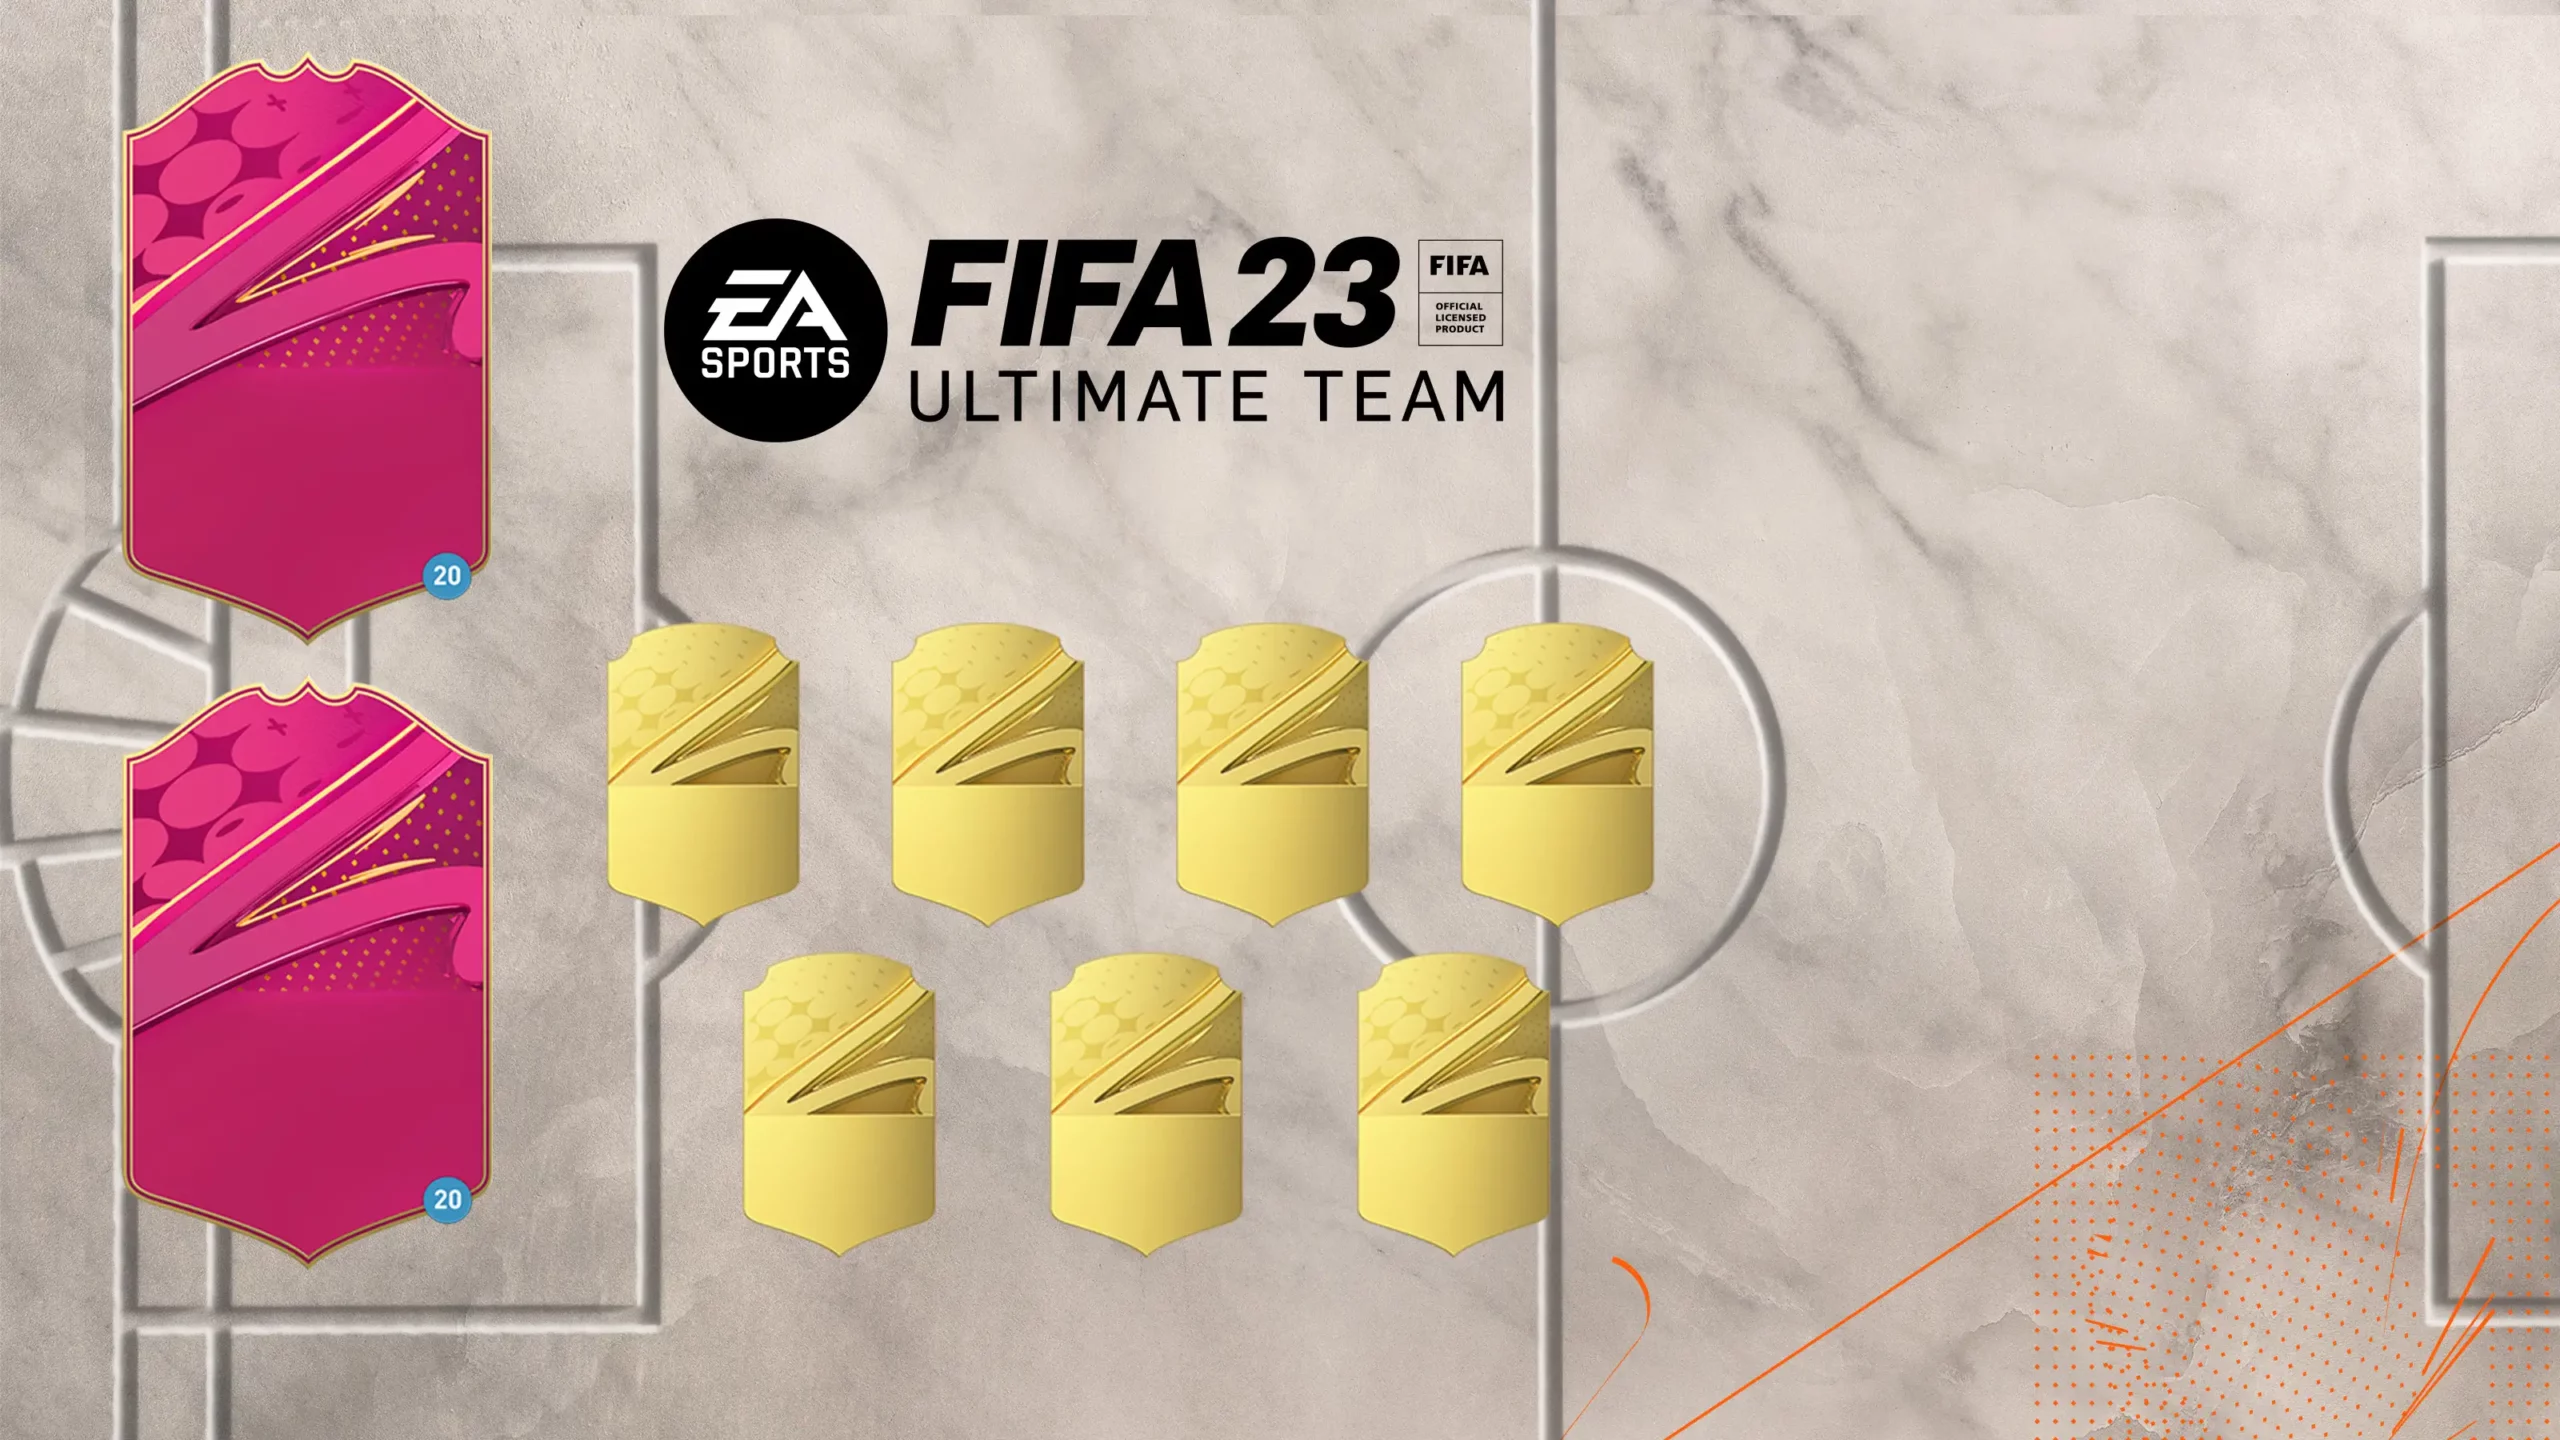 How to Get the Latest Prime Gaming FIFA 23